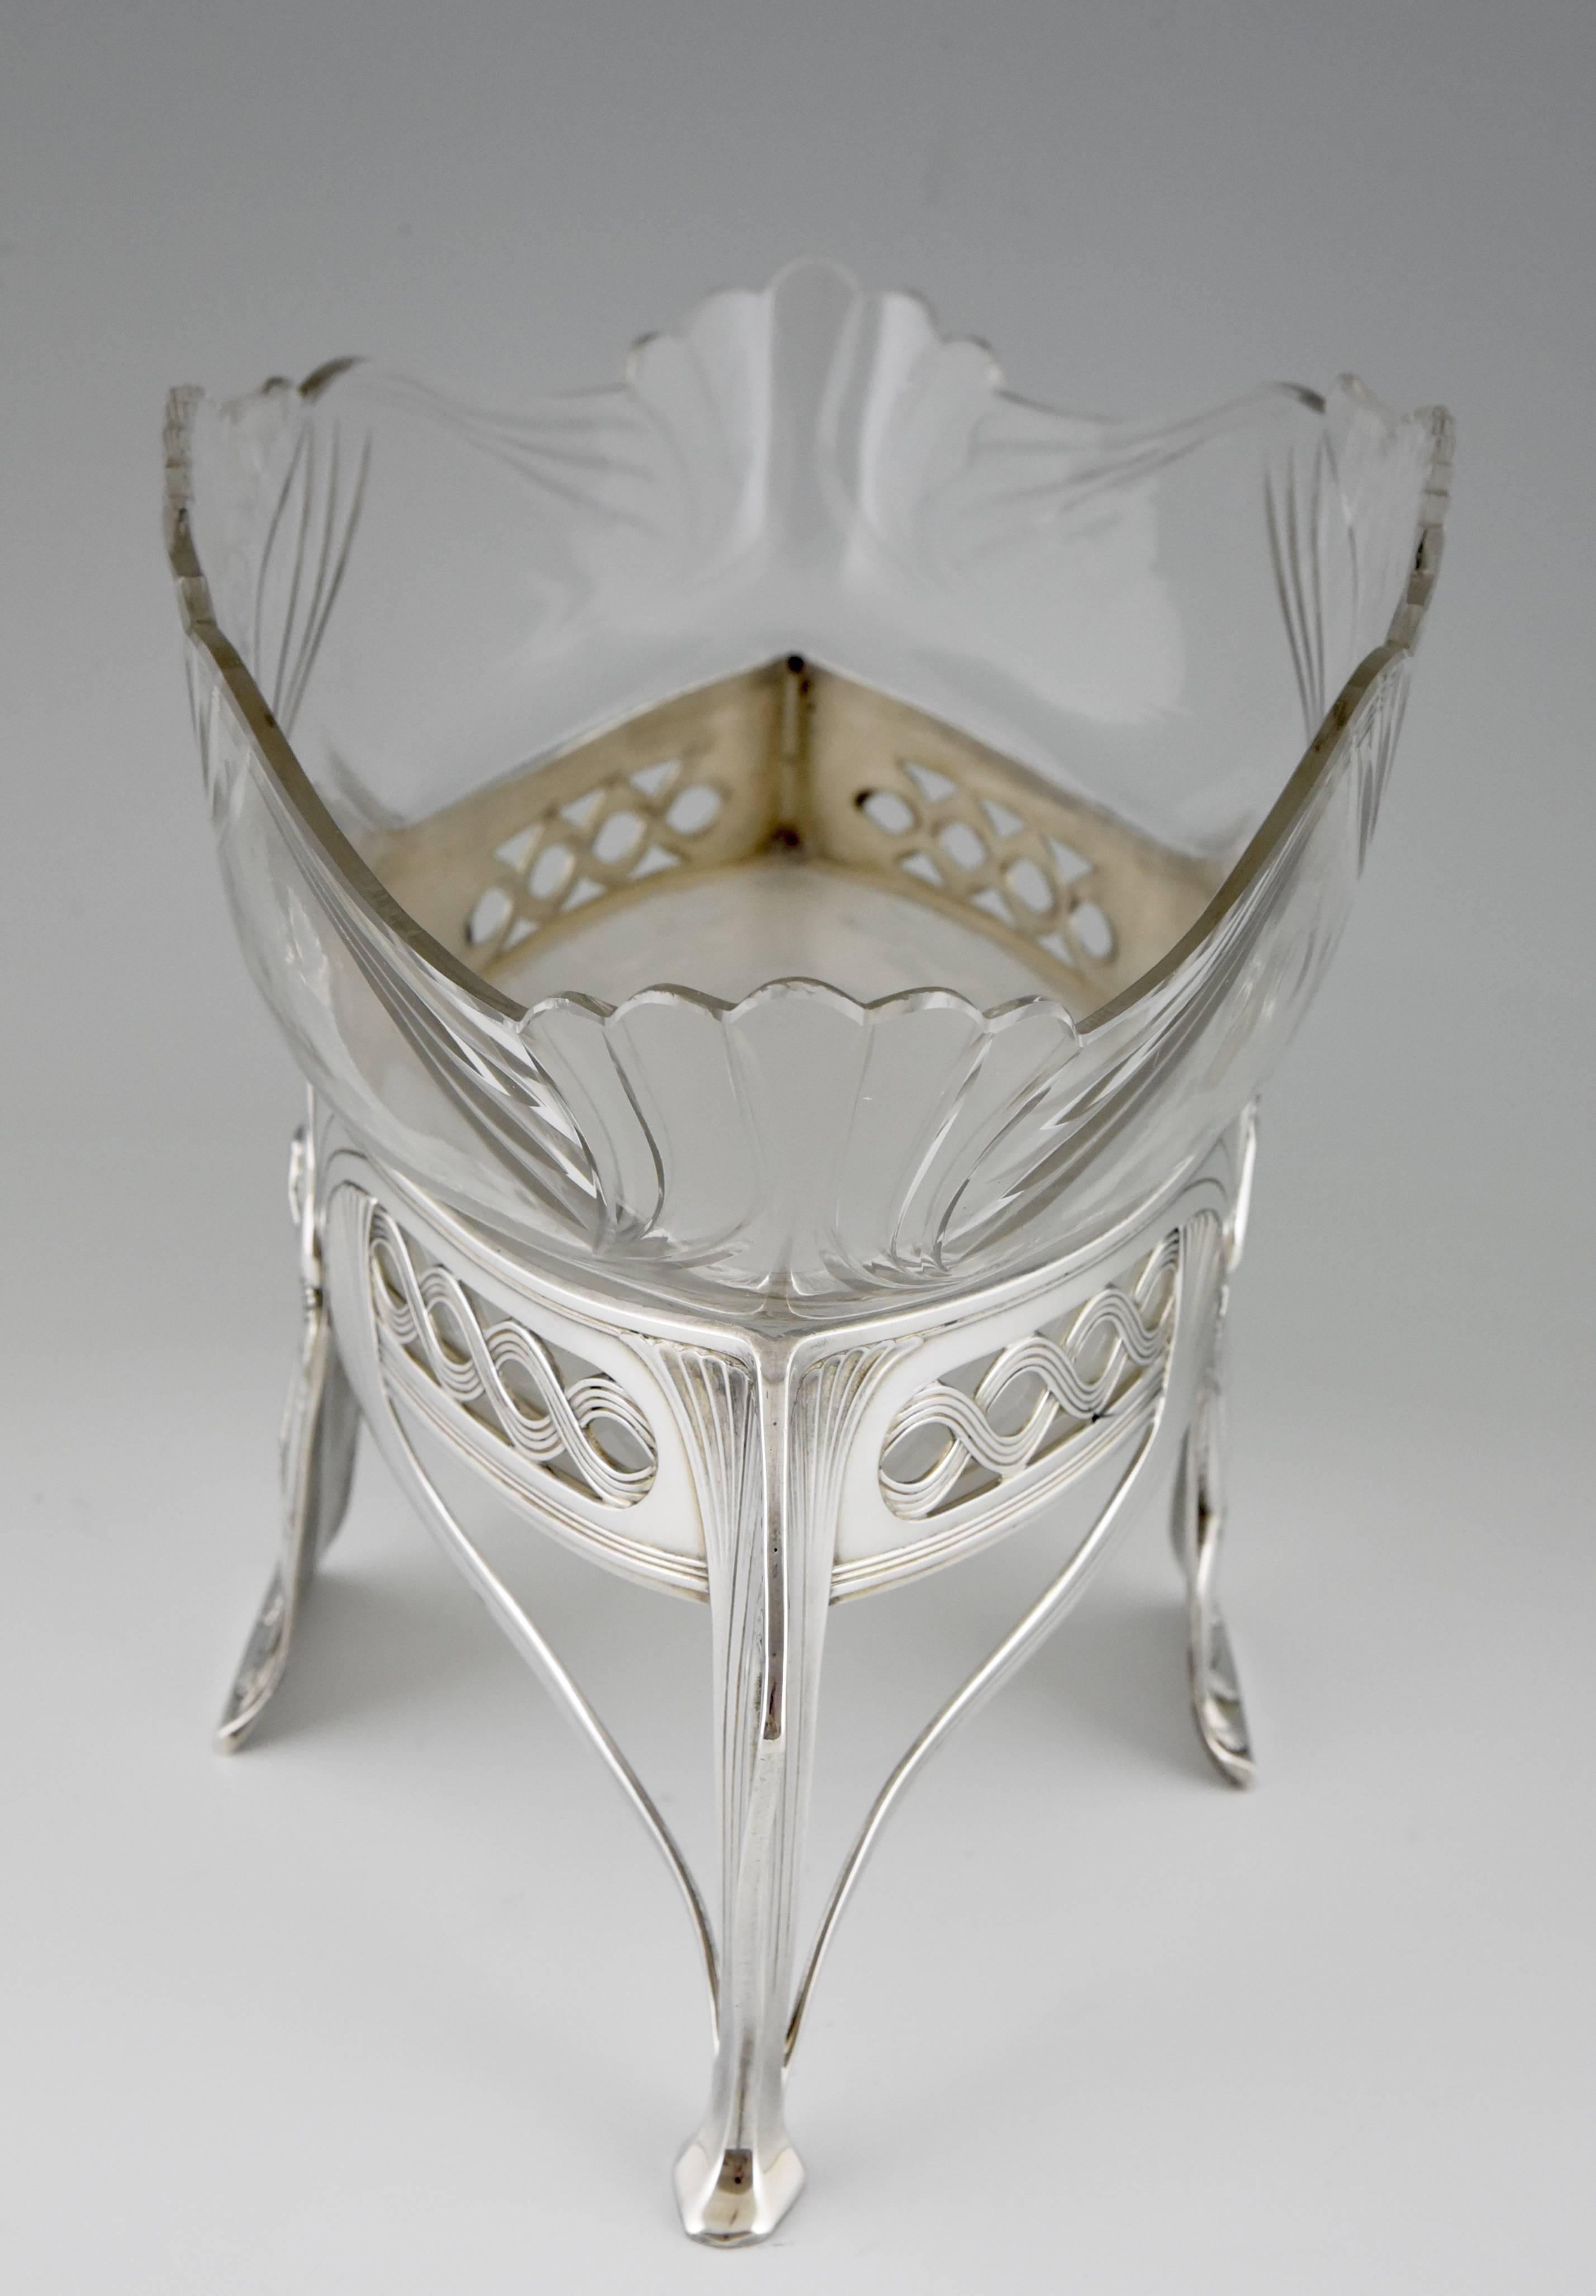 An Art Nouveau flower dish decorated with romantic semi nude couple and leaves and finely cut-glass liner.
By WMF, Württembergische Metallwaren Fabrik. 

Artist/ Maker: WMF 1906.
Signature/ Marks: WMF mark, 60, 0/1, ox, and B.
Style: Art